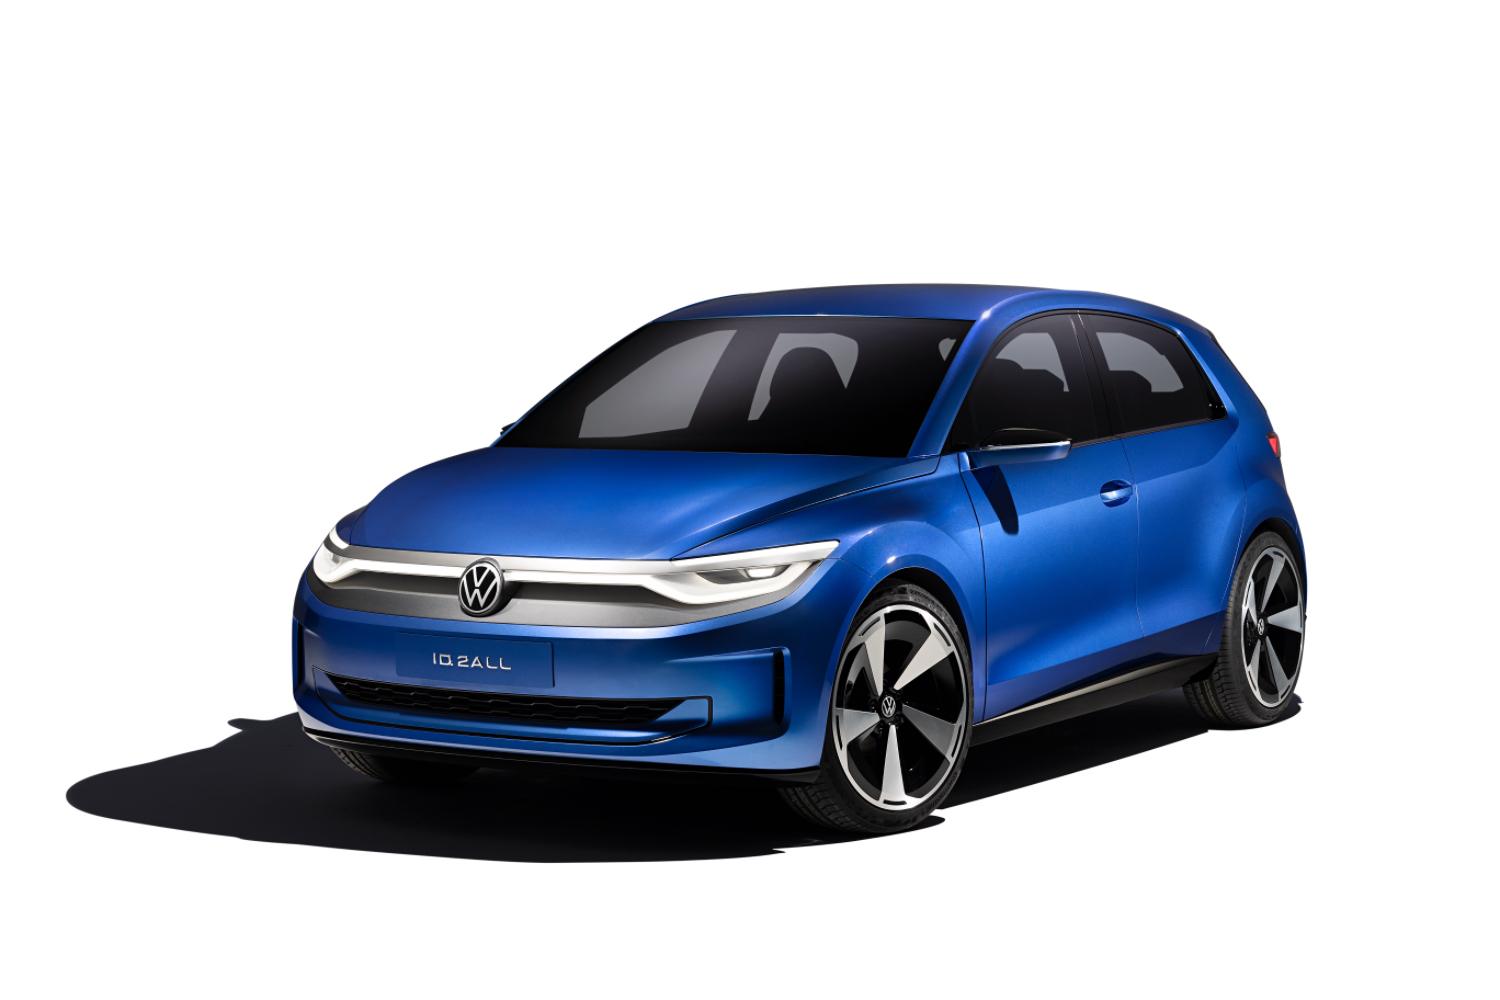 Volkswagen reveals new affordable ID. 2all